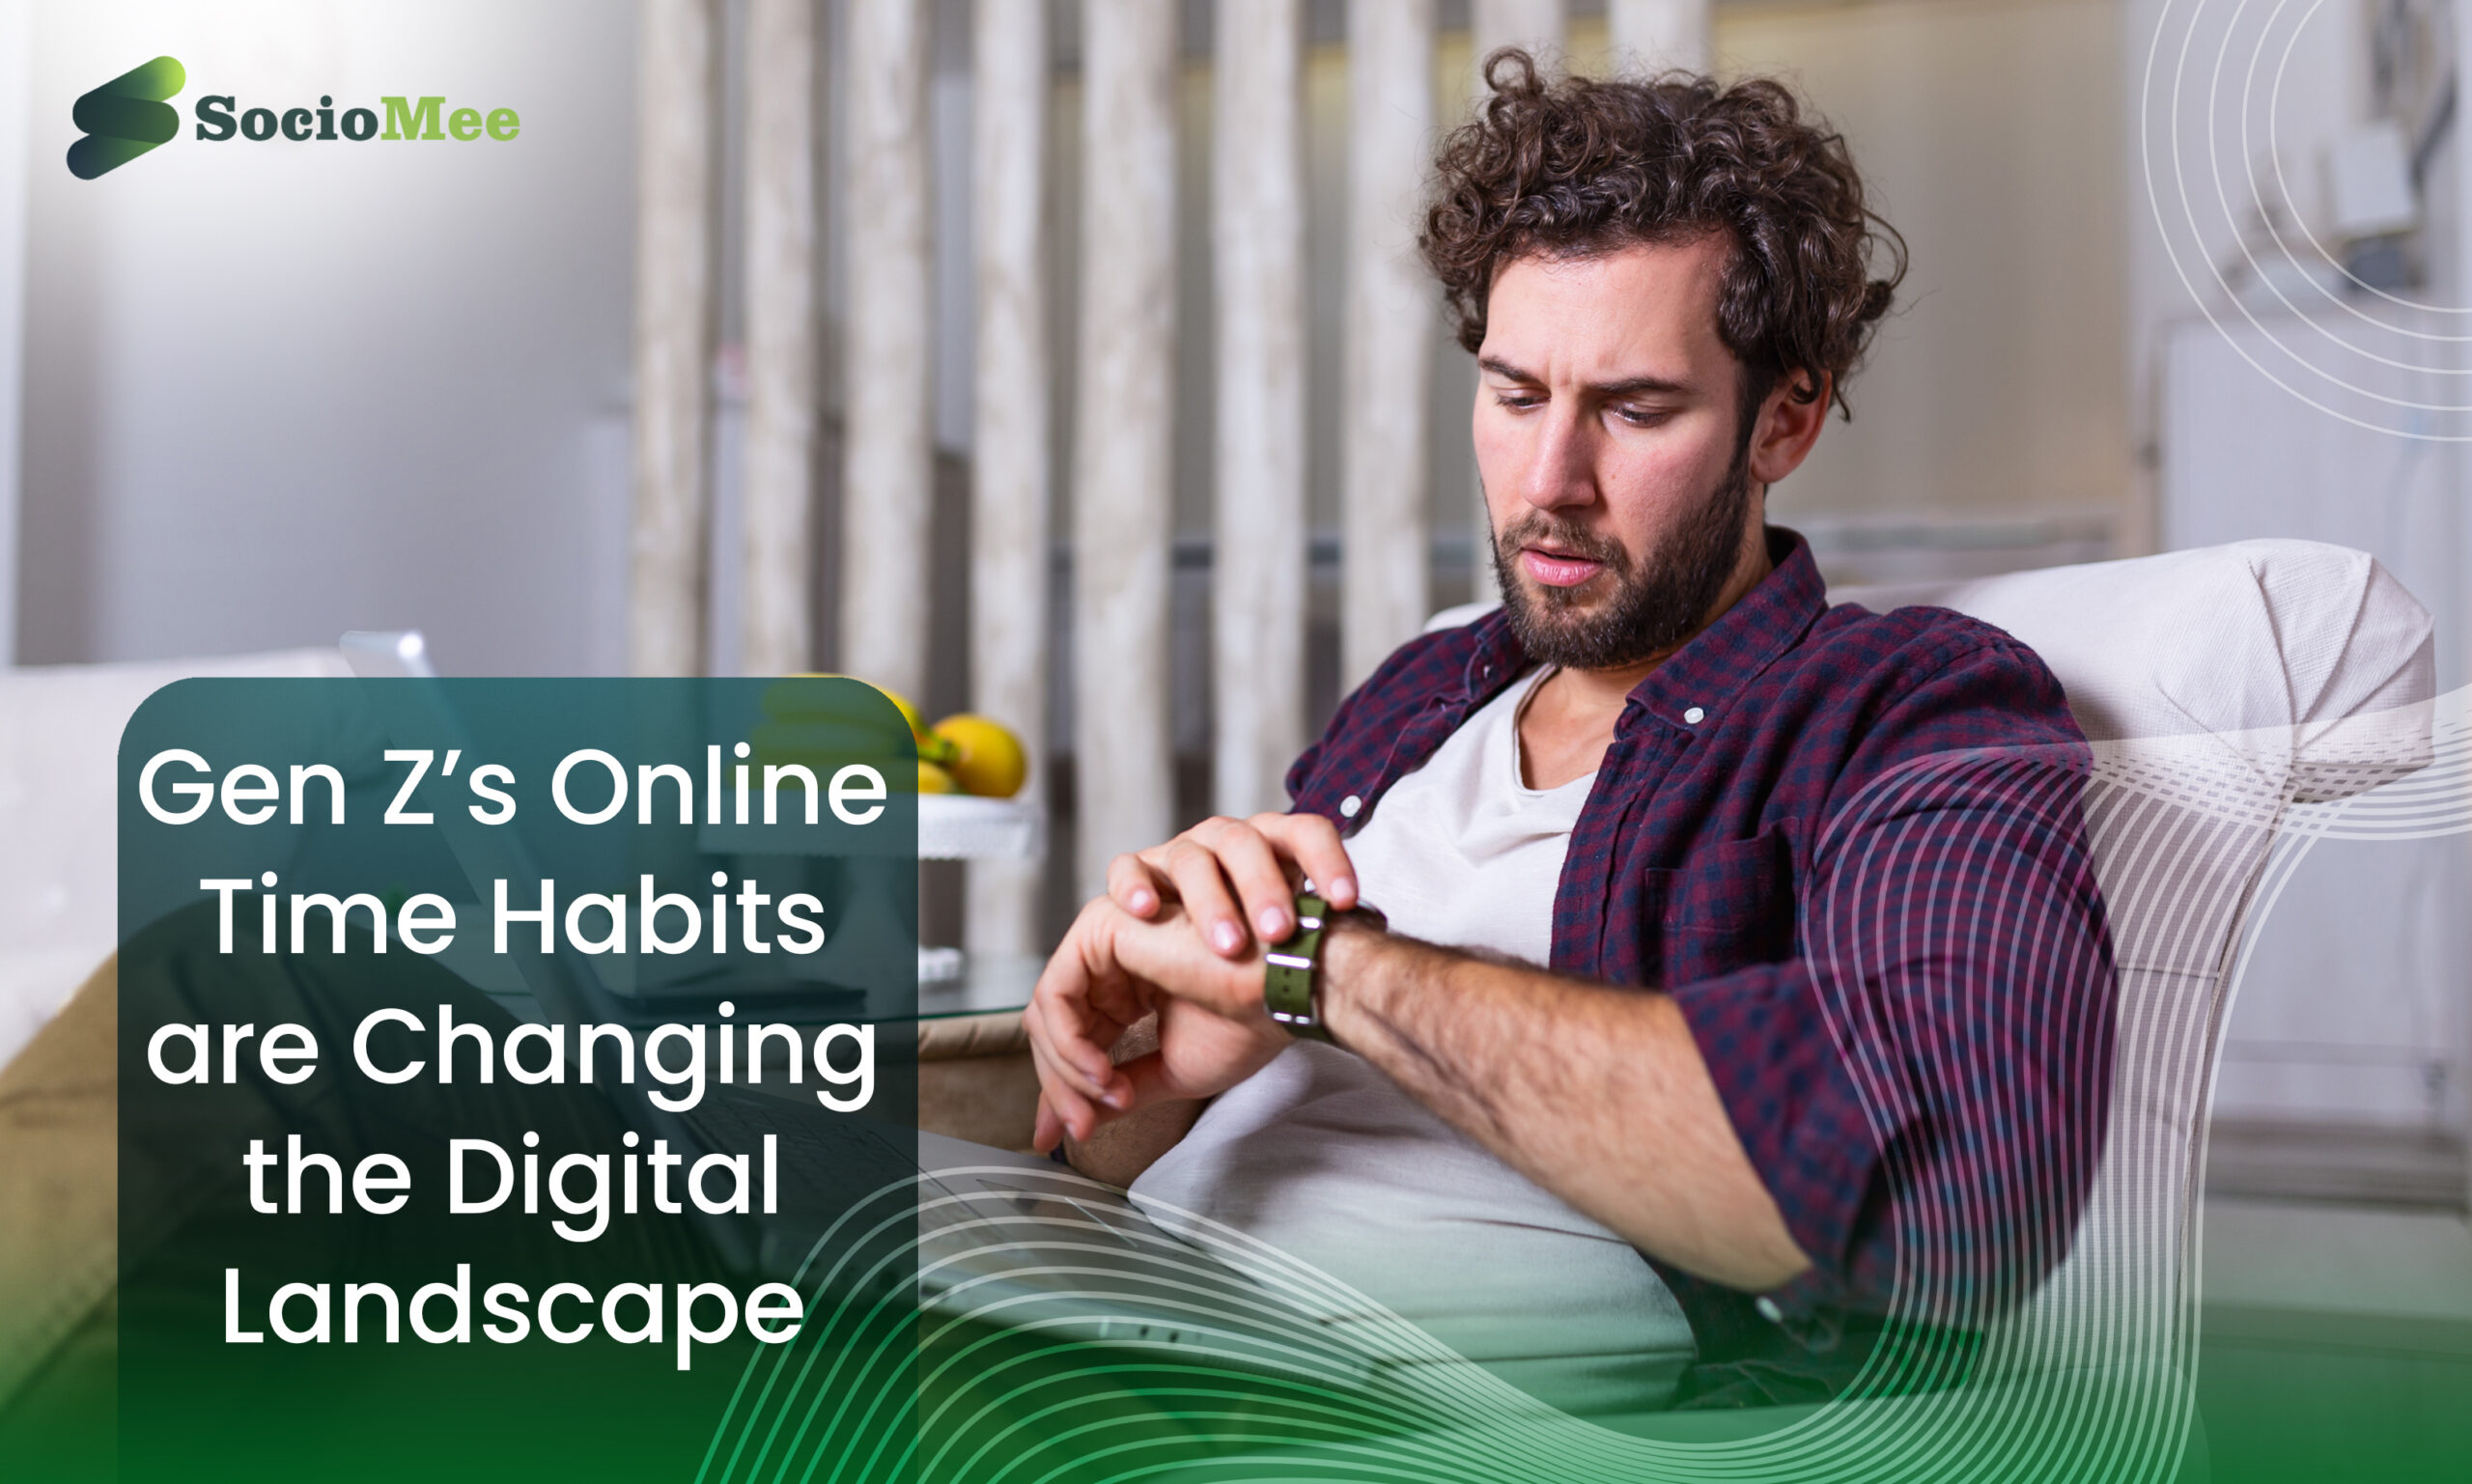 How Gen Z’s Online Time Habits are Changing the Digital Landscape in 2023.